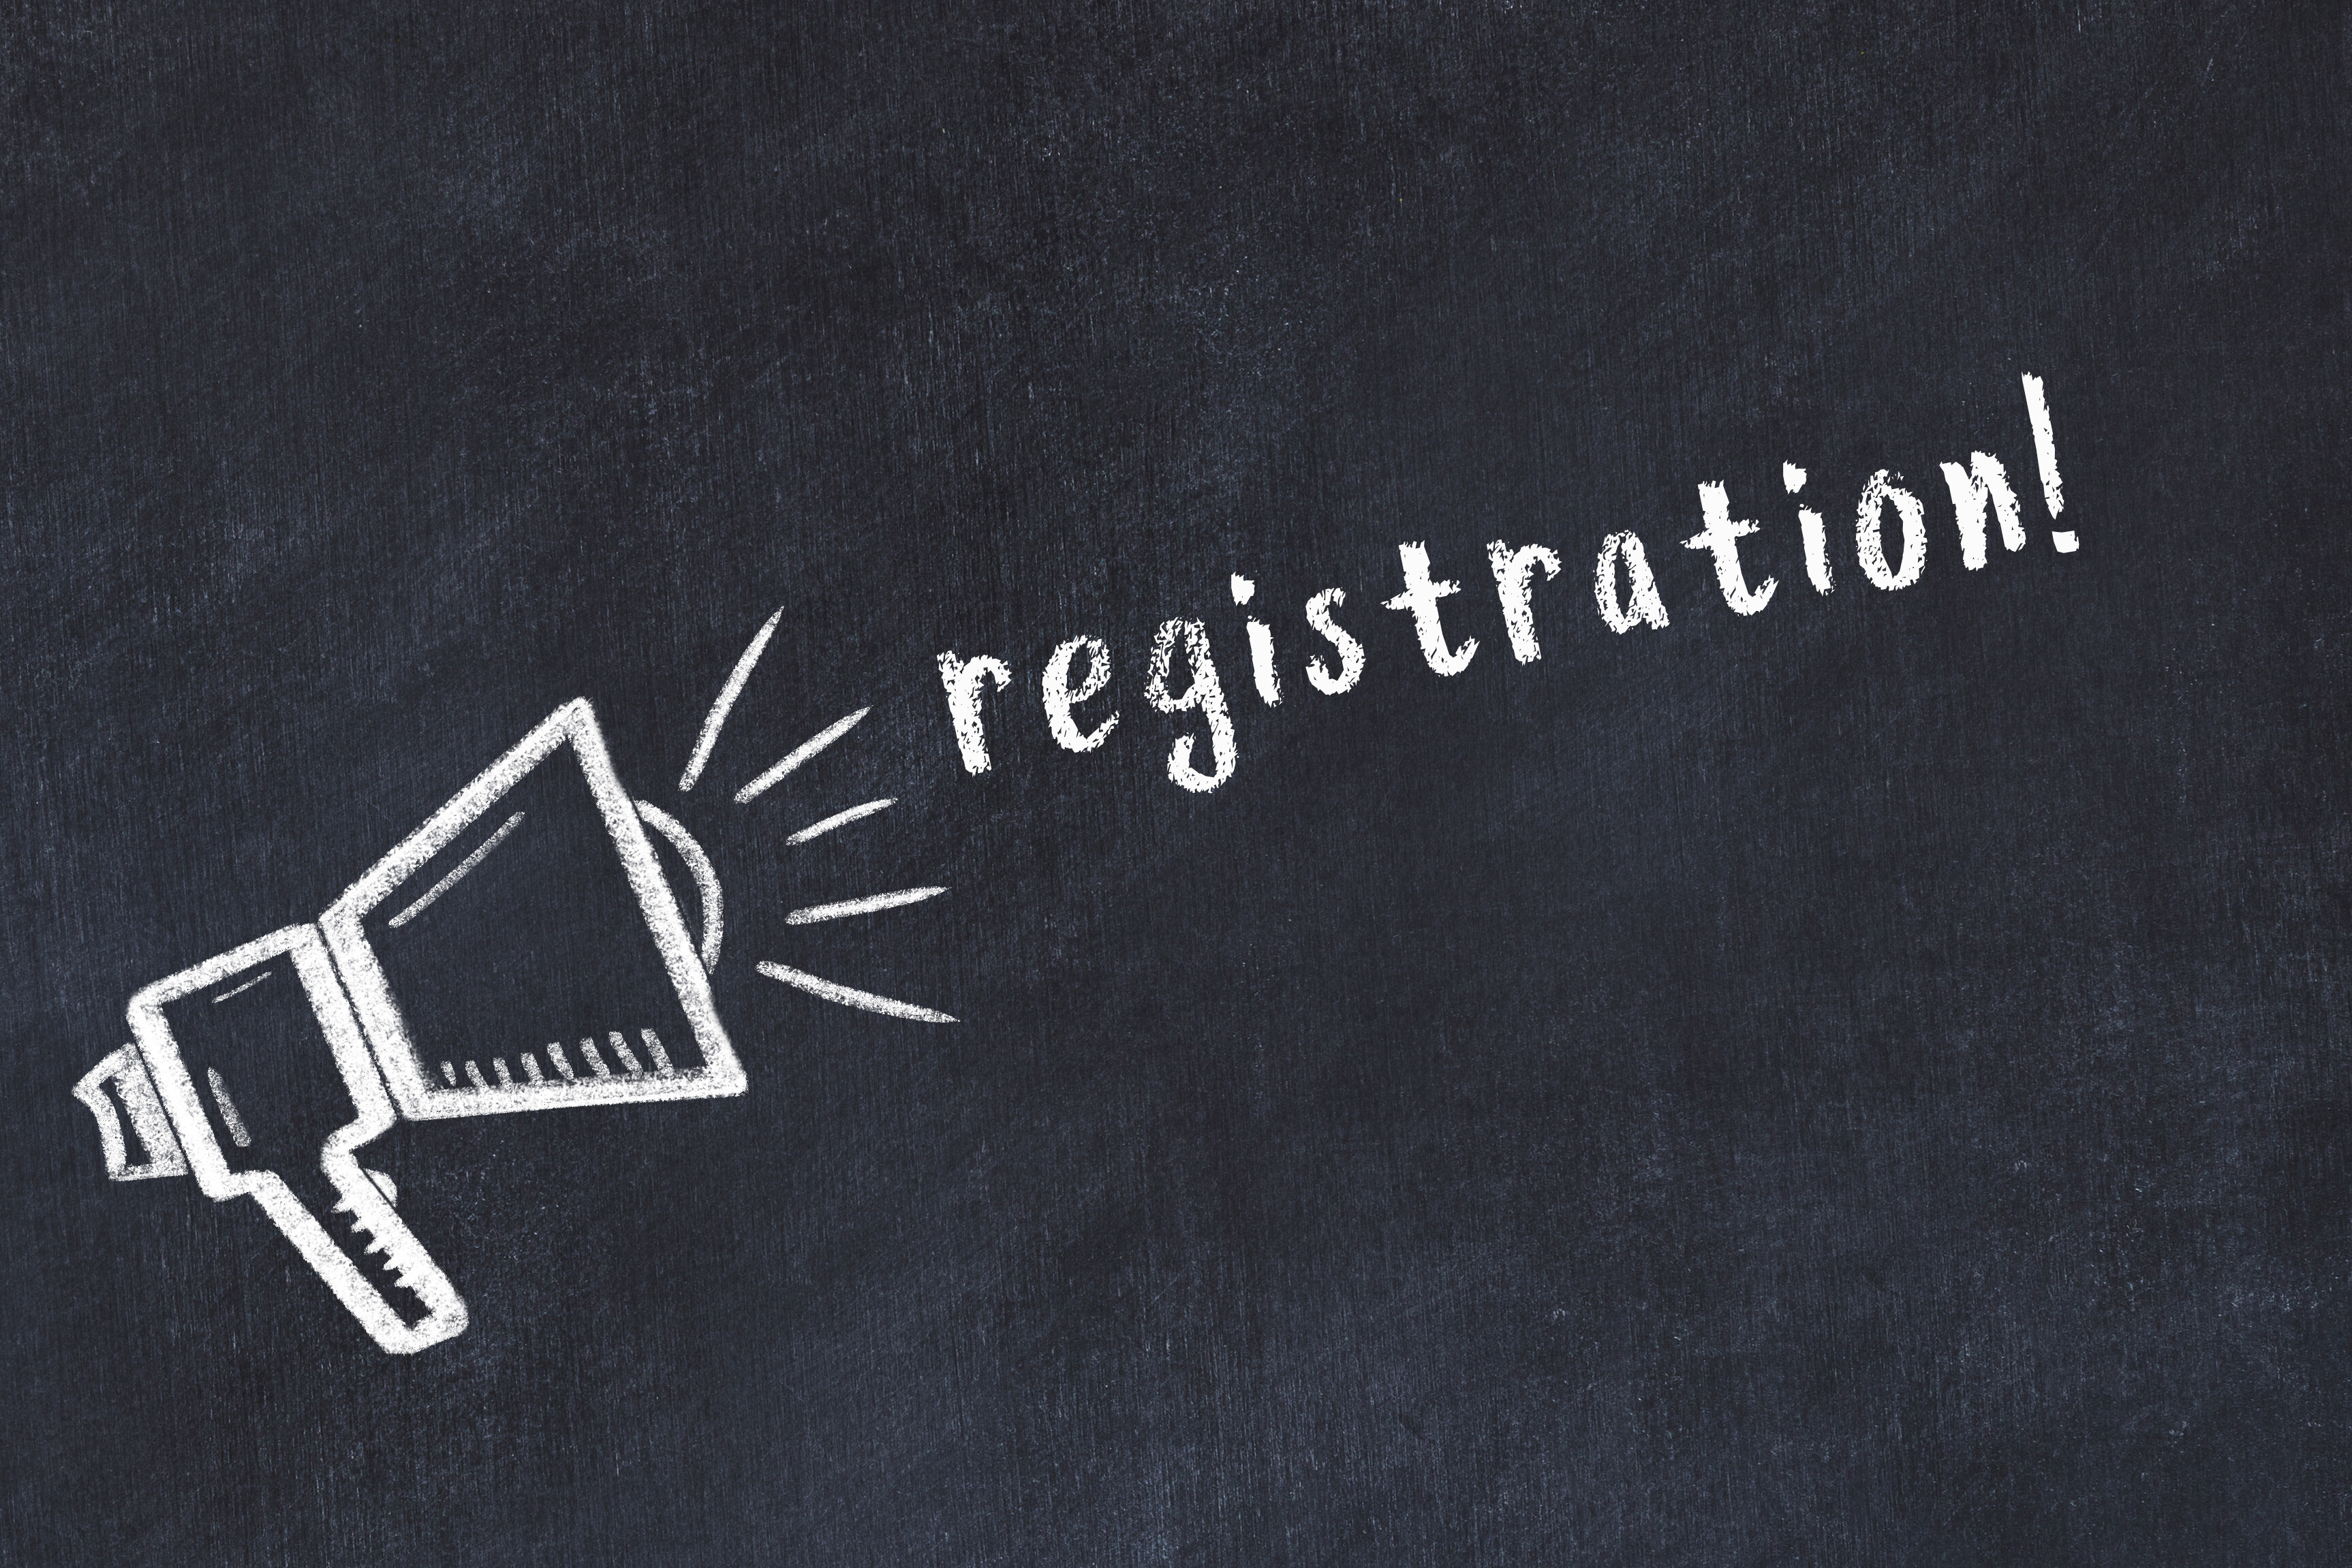 Grade 6 Registration Information for the 2022-23 School Year (George Waters)